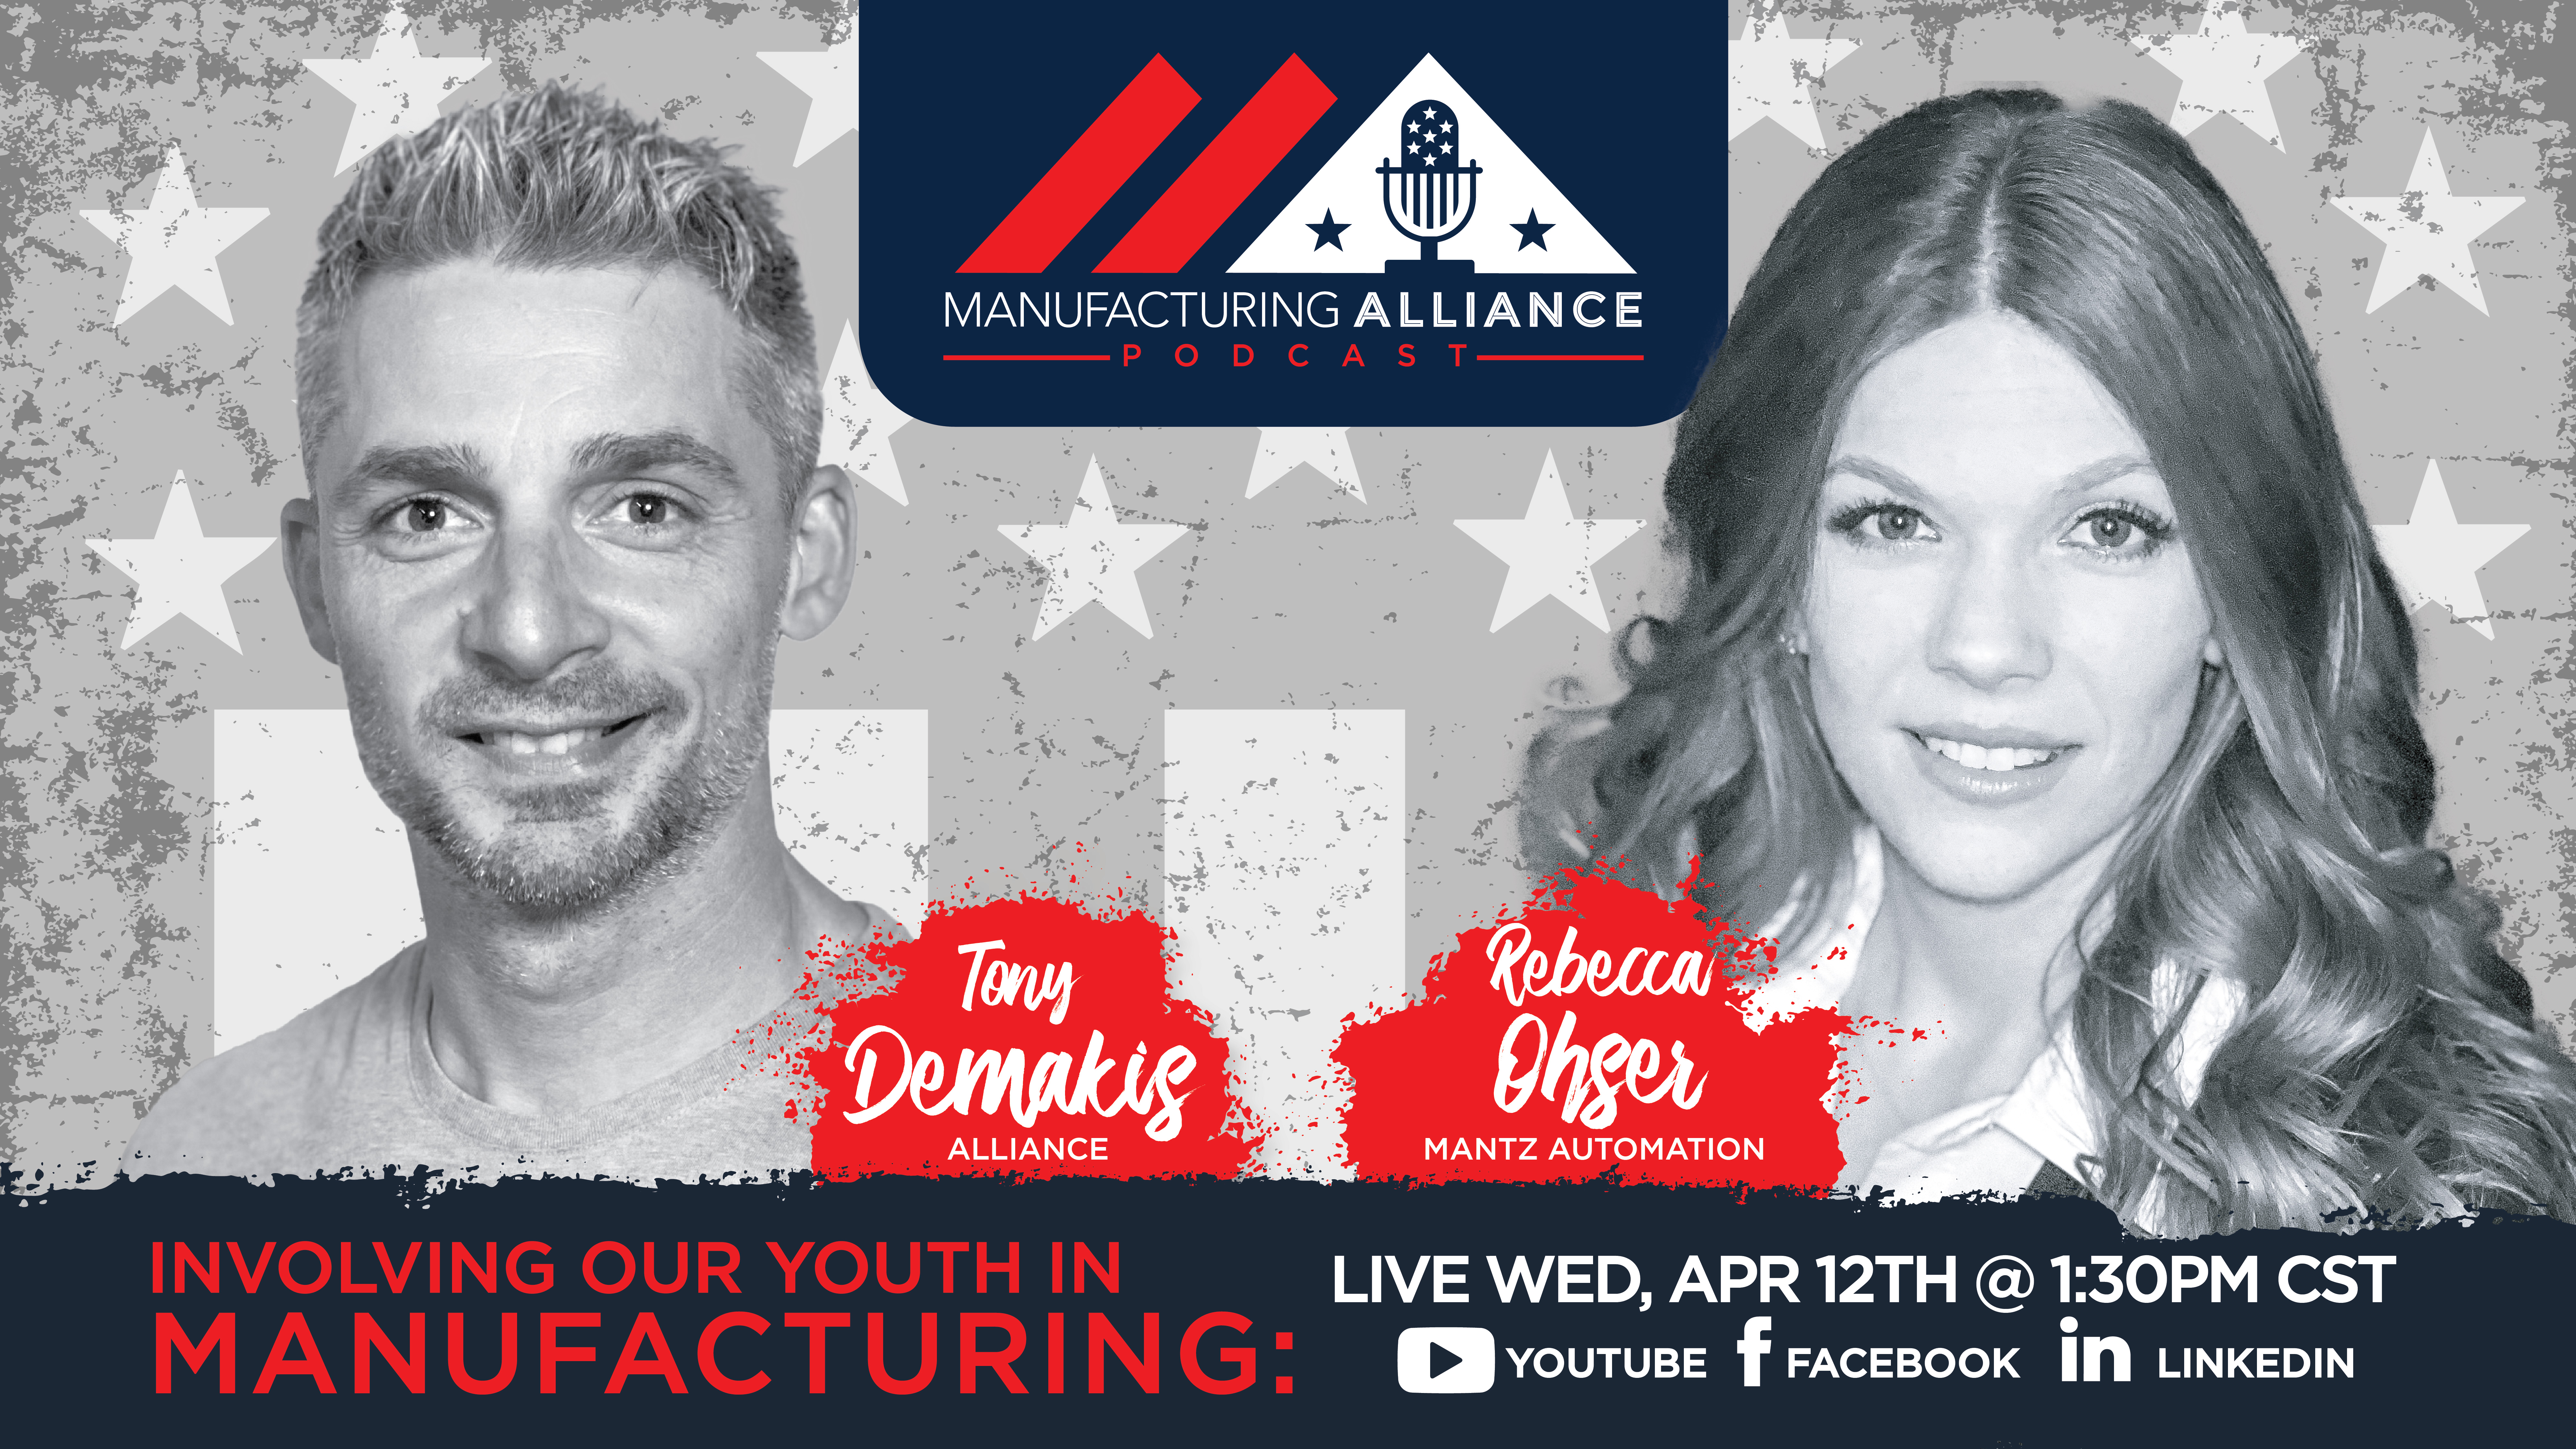 The Manufacturing Alliance Podcast Presents: Rebecca Ohser | Mantz Automation